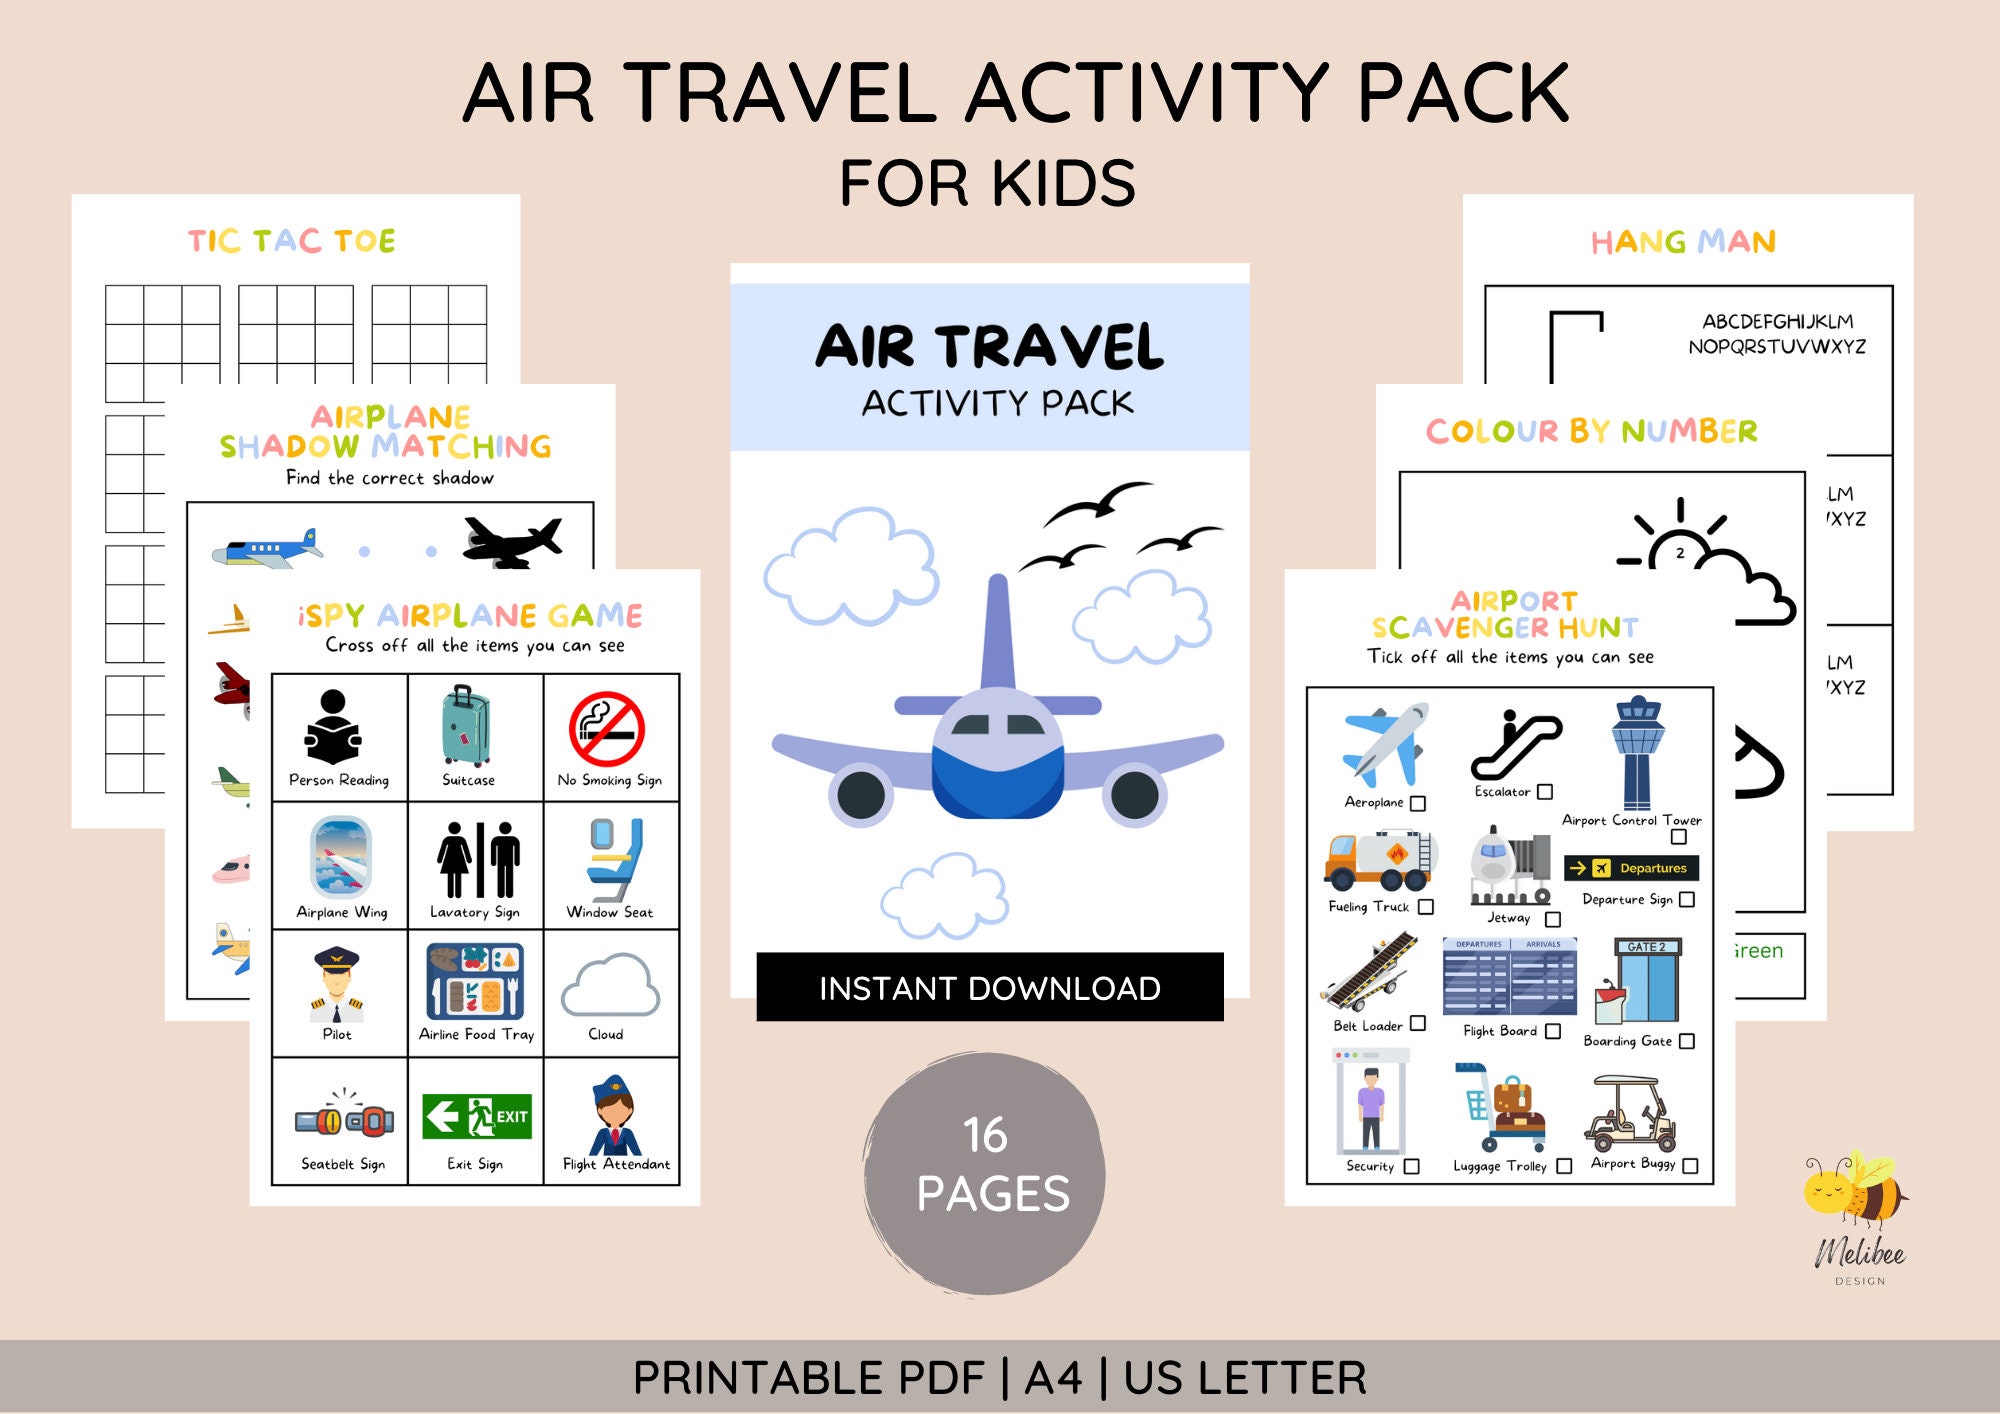 Airplane Activities for Kids. Airplane Activity Kit. Airplane Games. Kids  Airplane Activity. Kids Travel Activities. Kids Travel Games. 